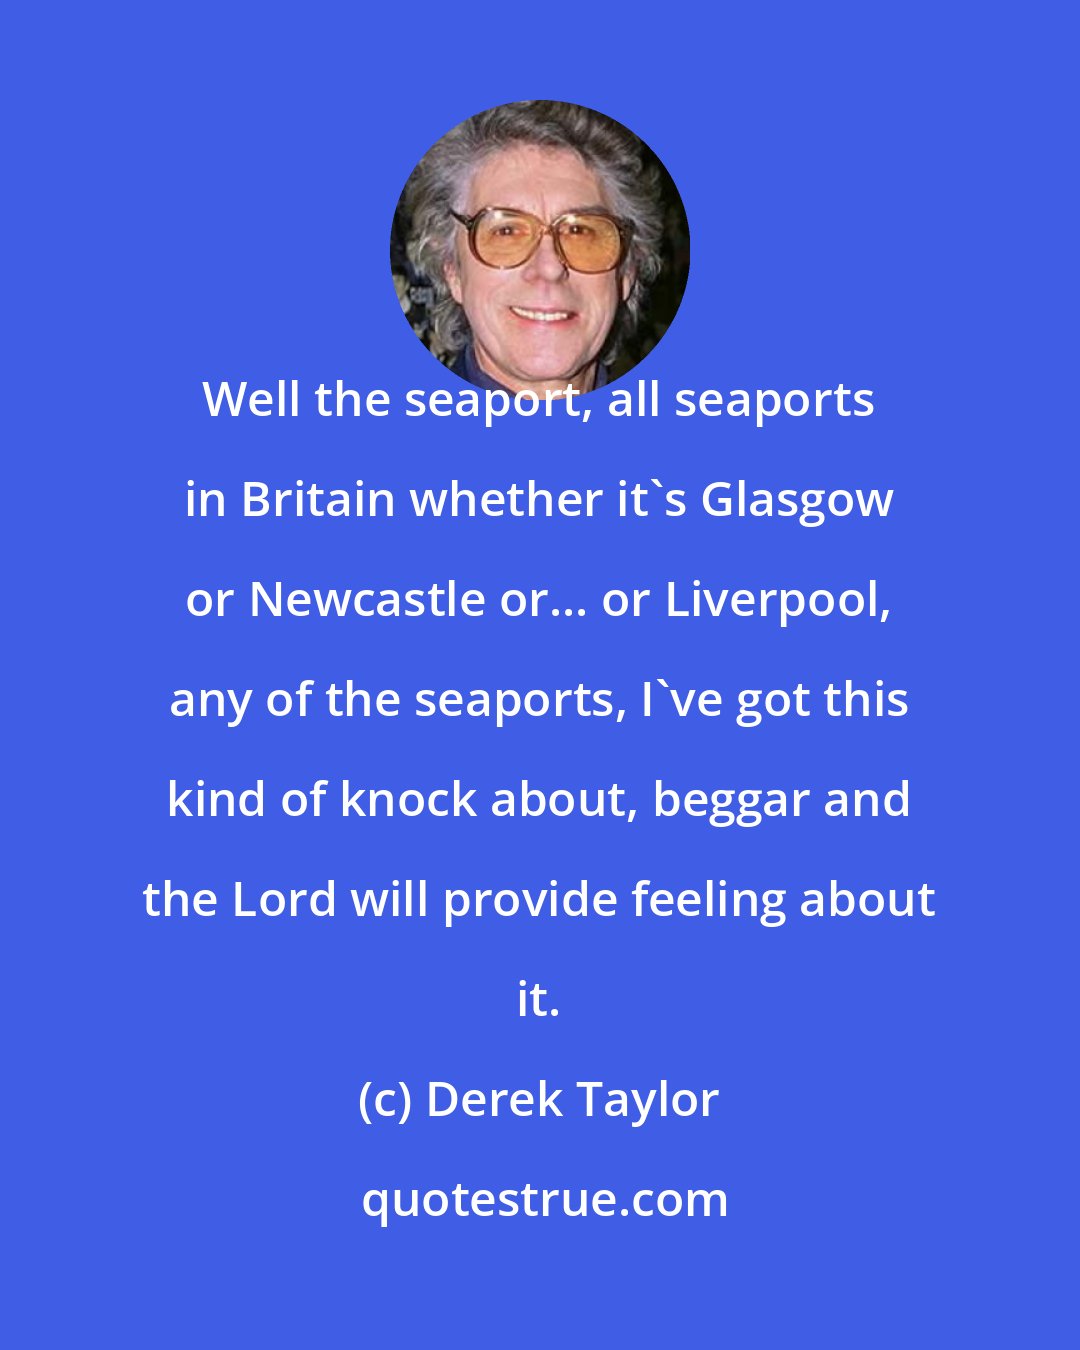 Derek Taylor: Well the seaport, all seaports in Britain whether it's Glasgow or Newcastle or... or Liverpool, any of the seaports, I've got this kind of knock about, beggar and the Lord will provide feeling about it.